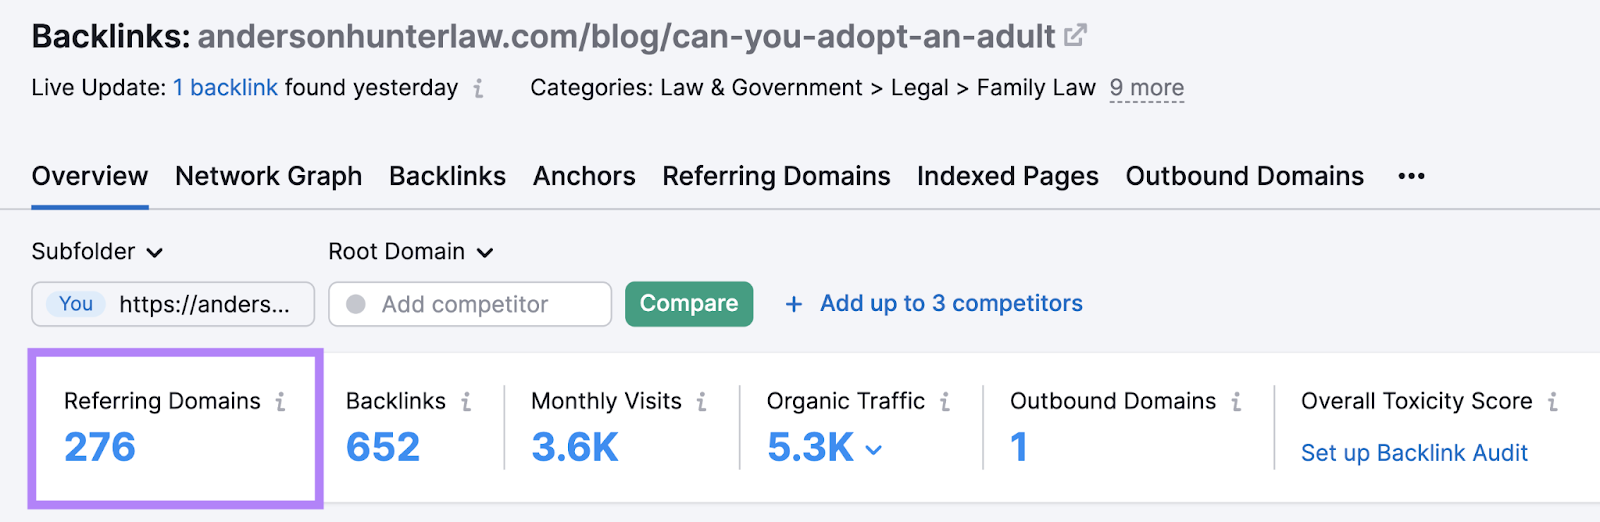 Backlink Analytics tool results for Anderson Hunter Law Firm’s post about adult adoption